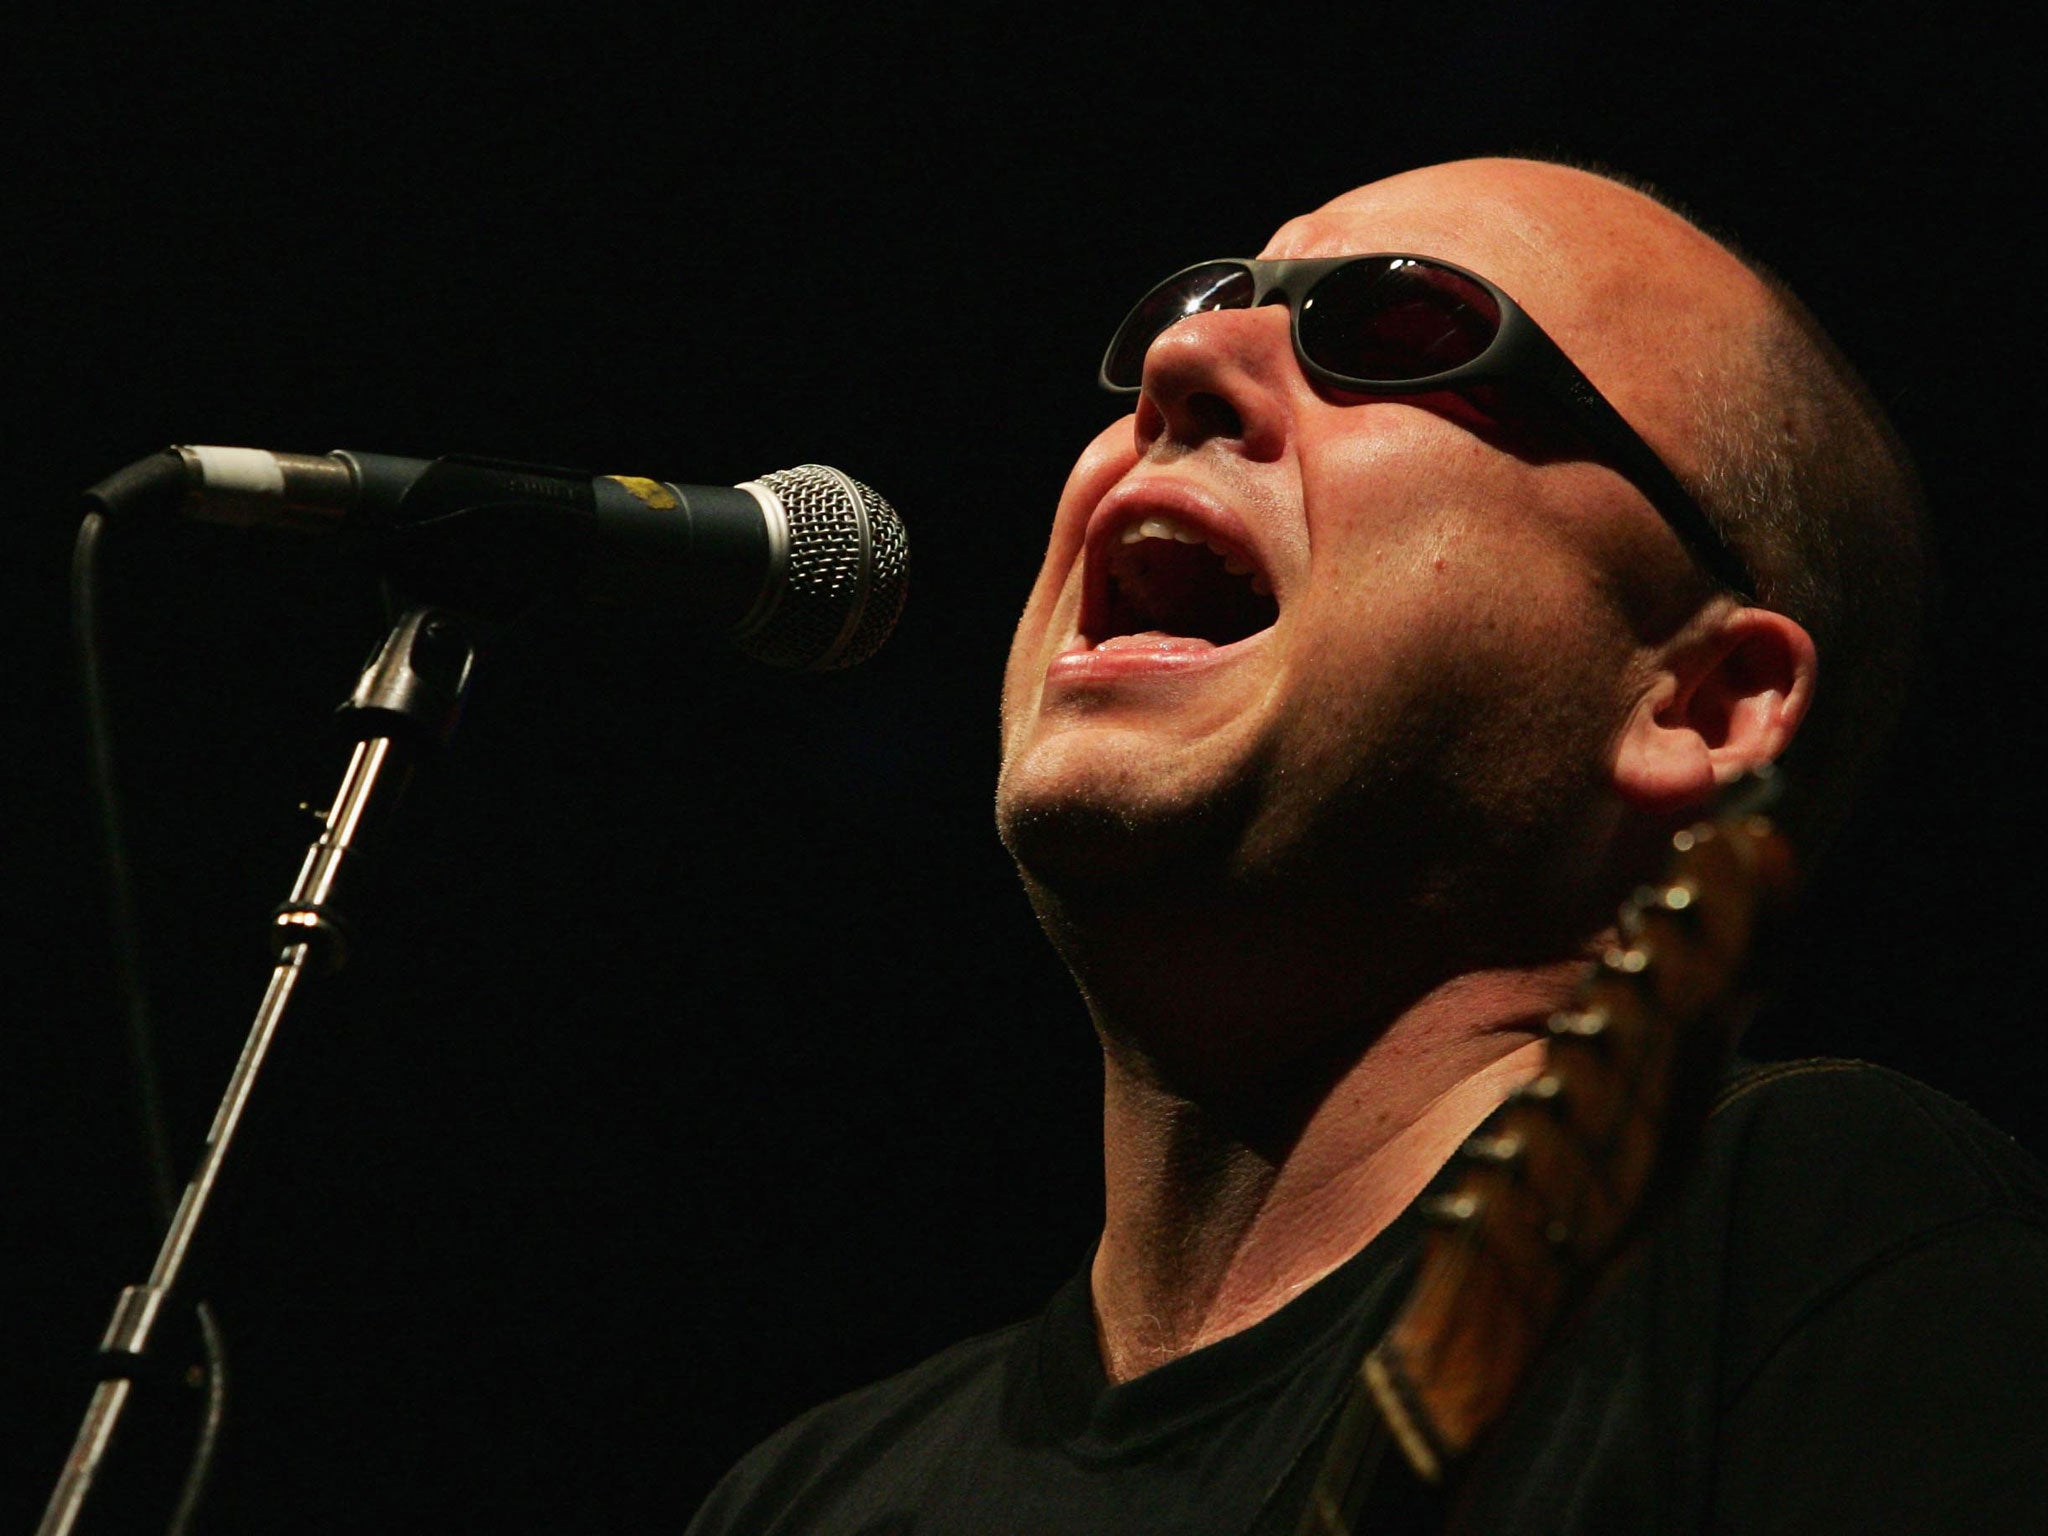 Black Francis, frontman of Pixies, who are releasing their first studio album in twenty-three years.